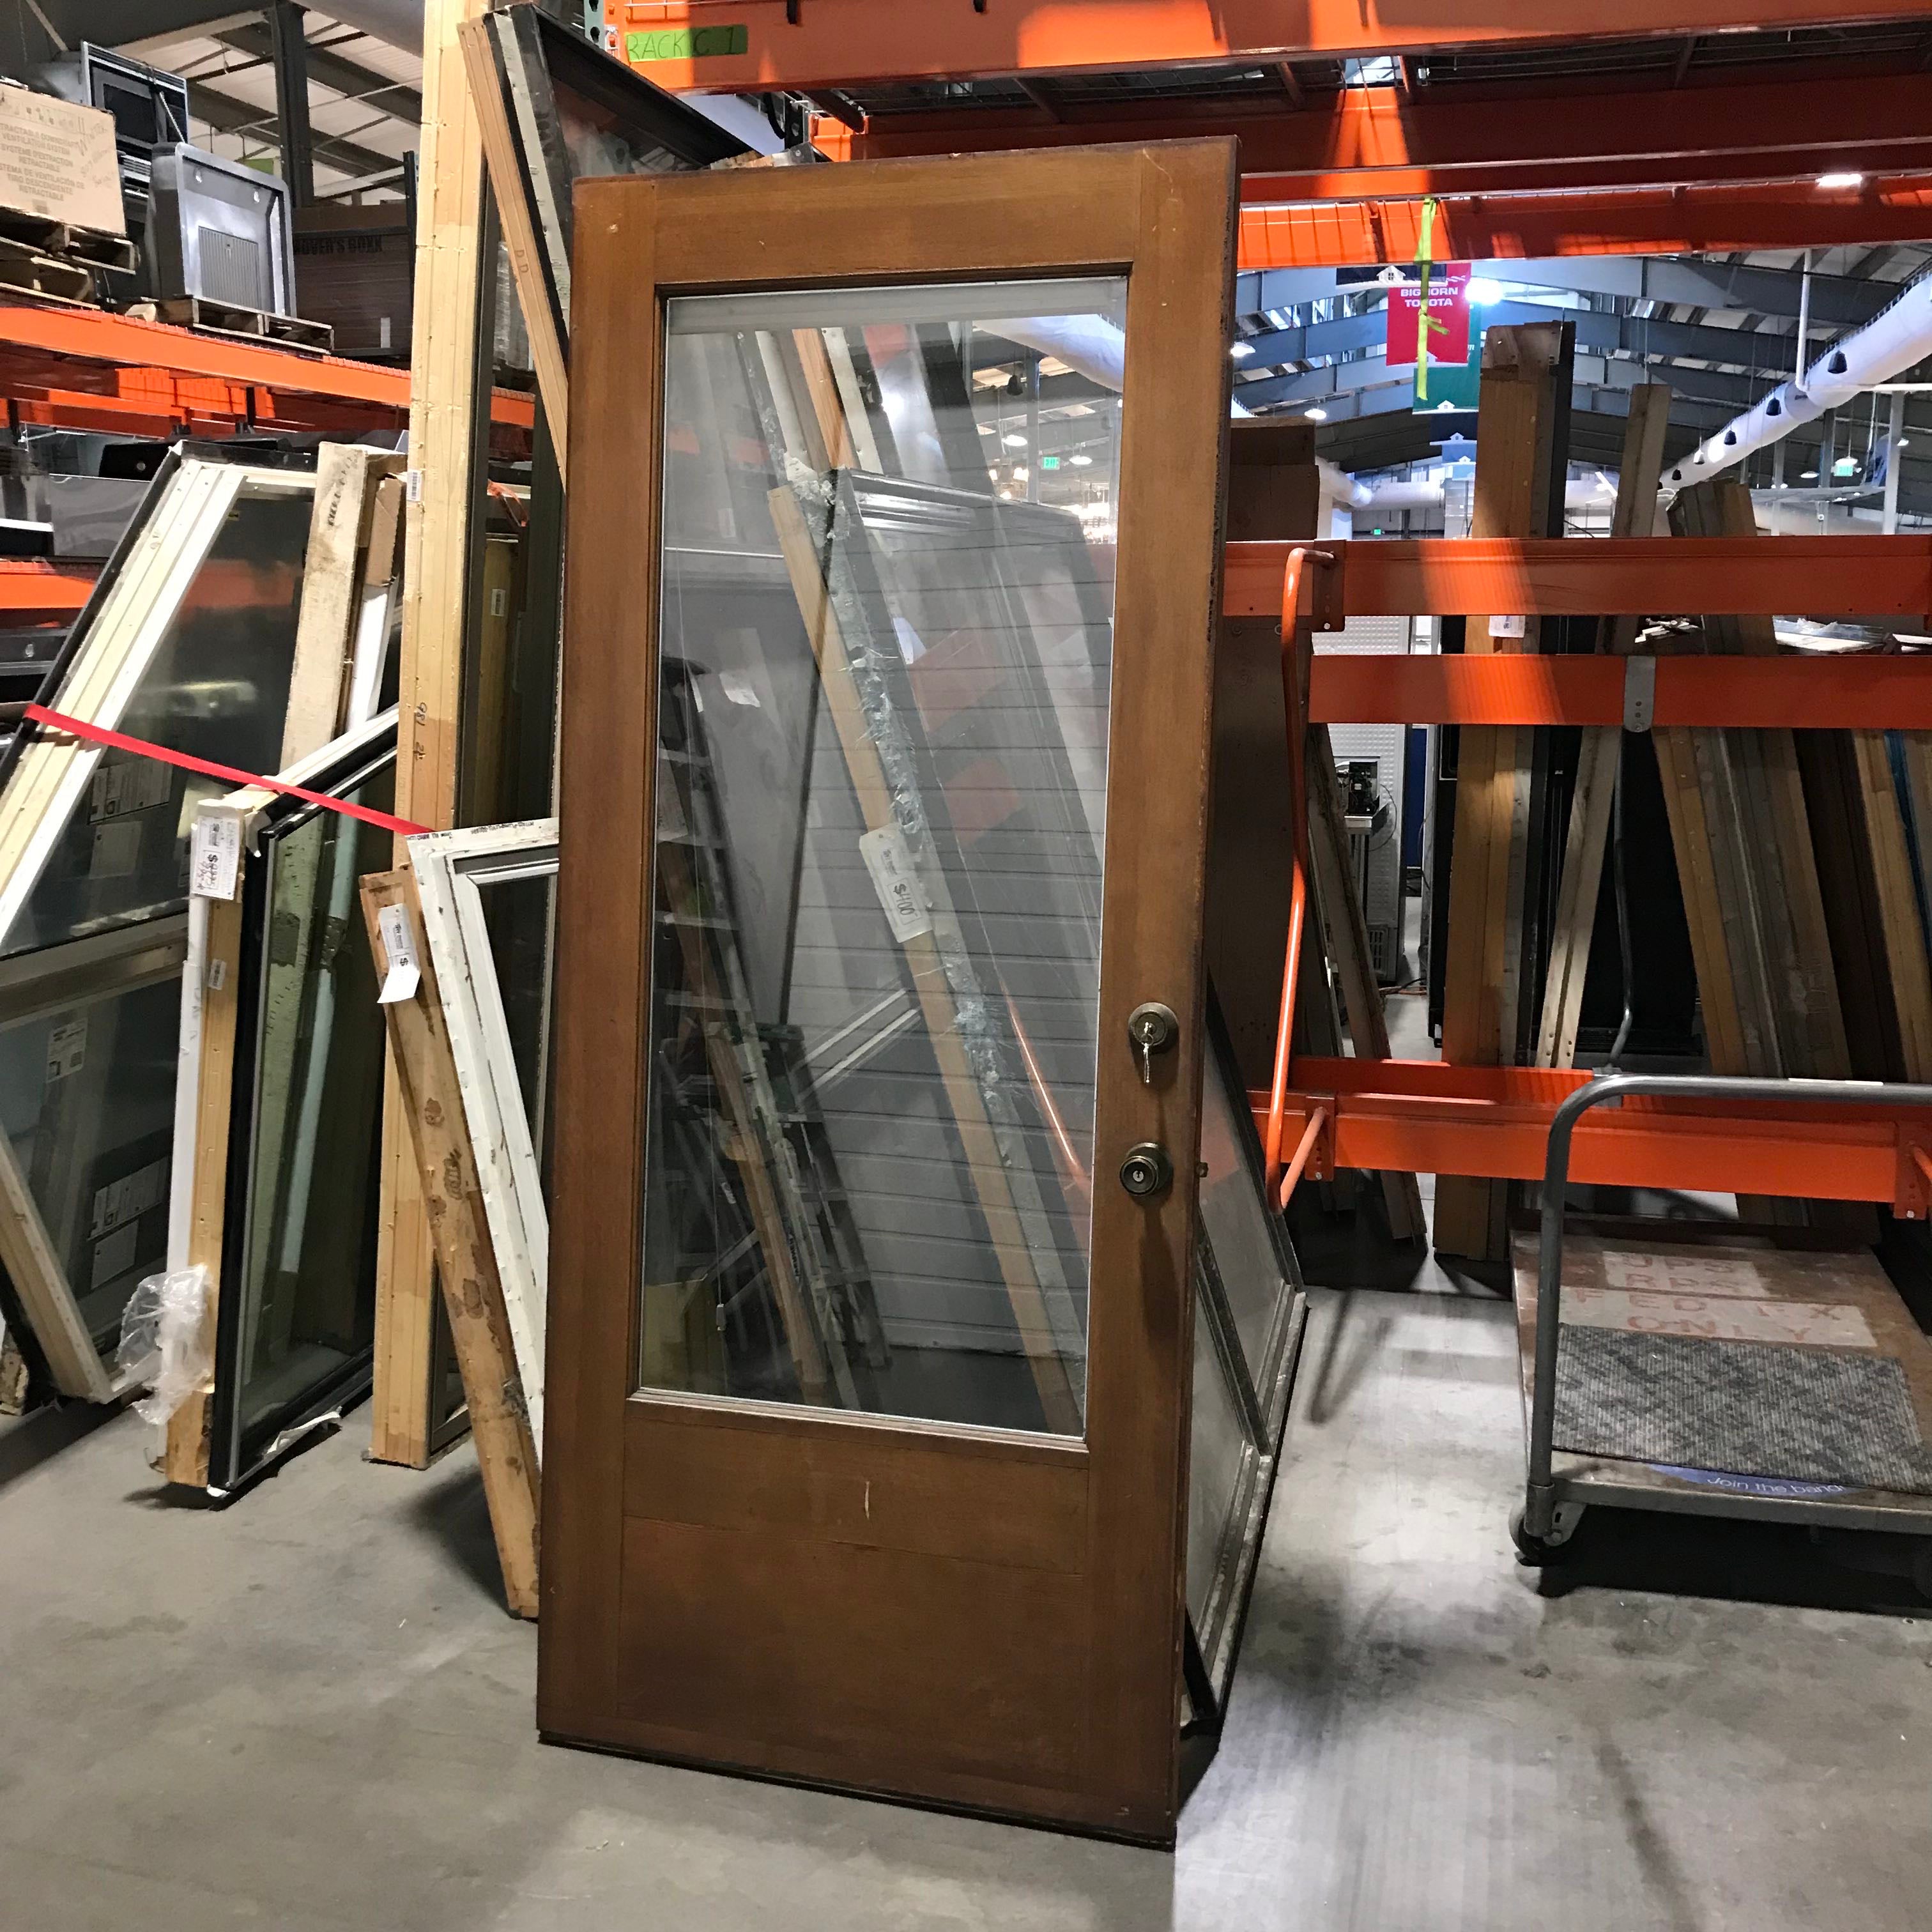 36"x 85.5"x 1.75" Set of 2 Stained Pine Exterior Glass Doors